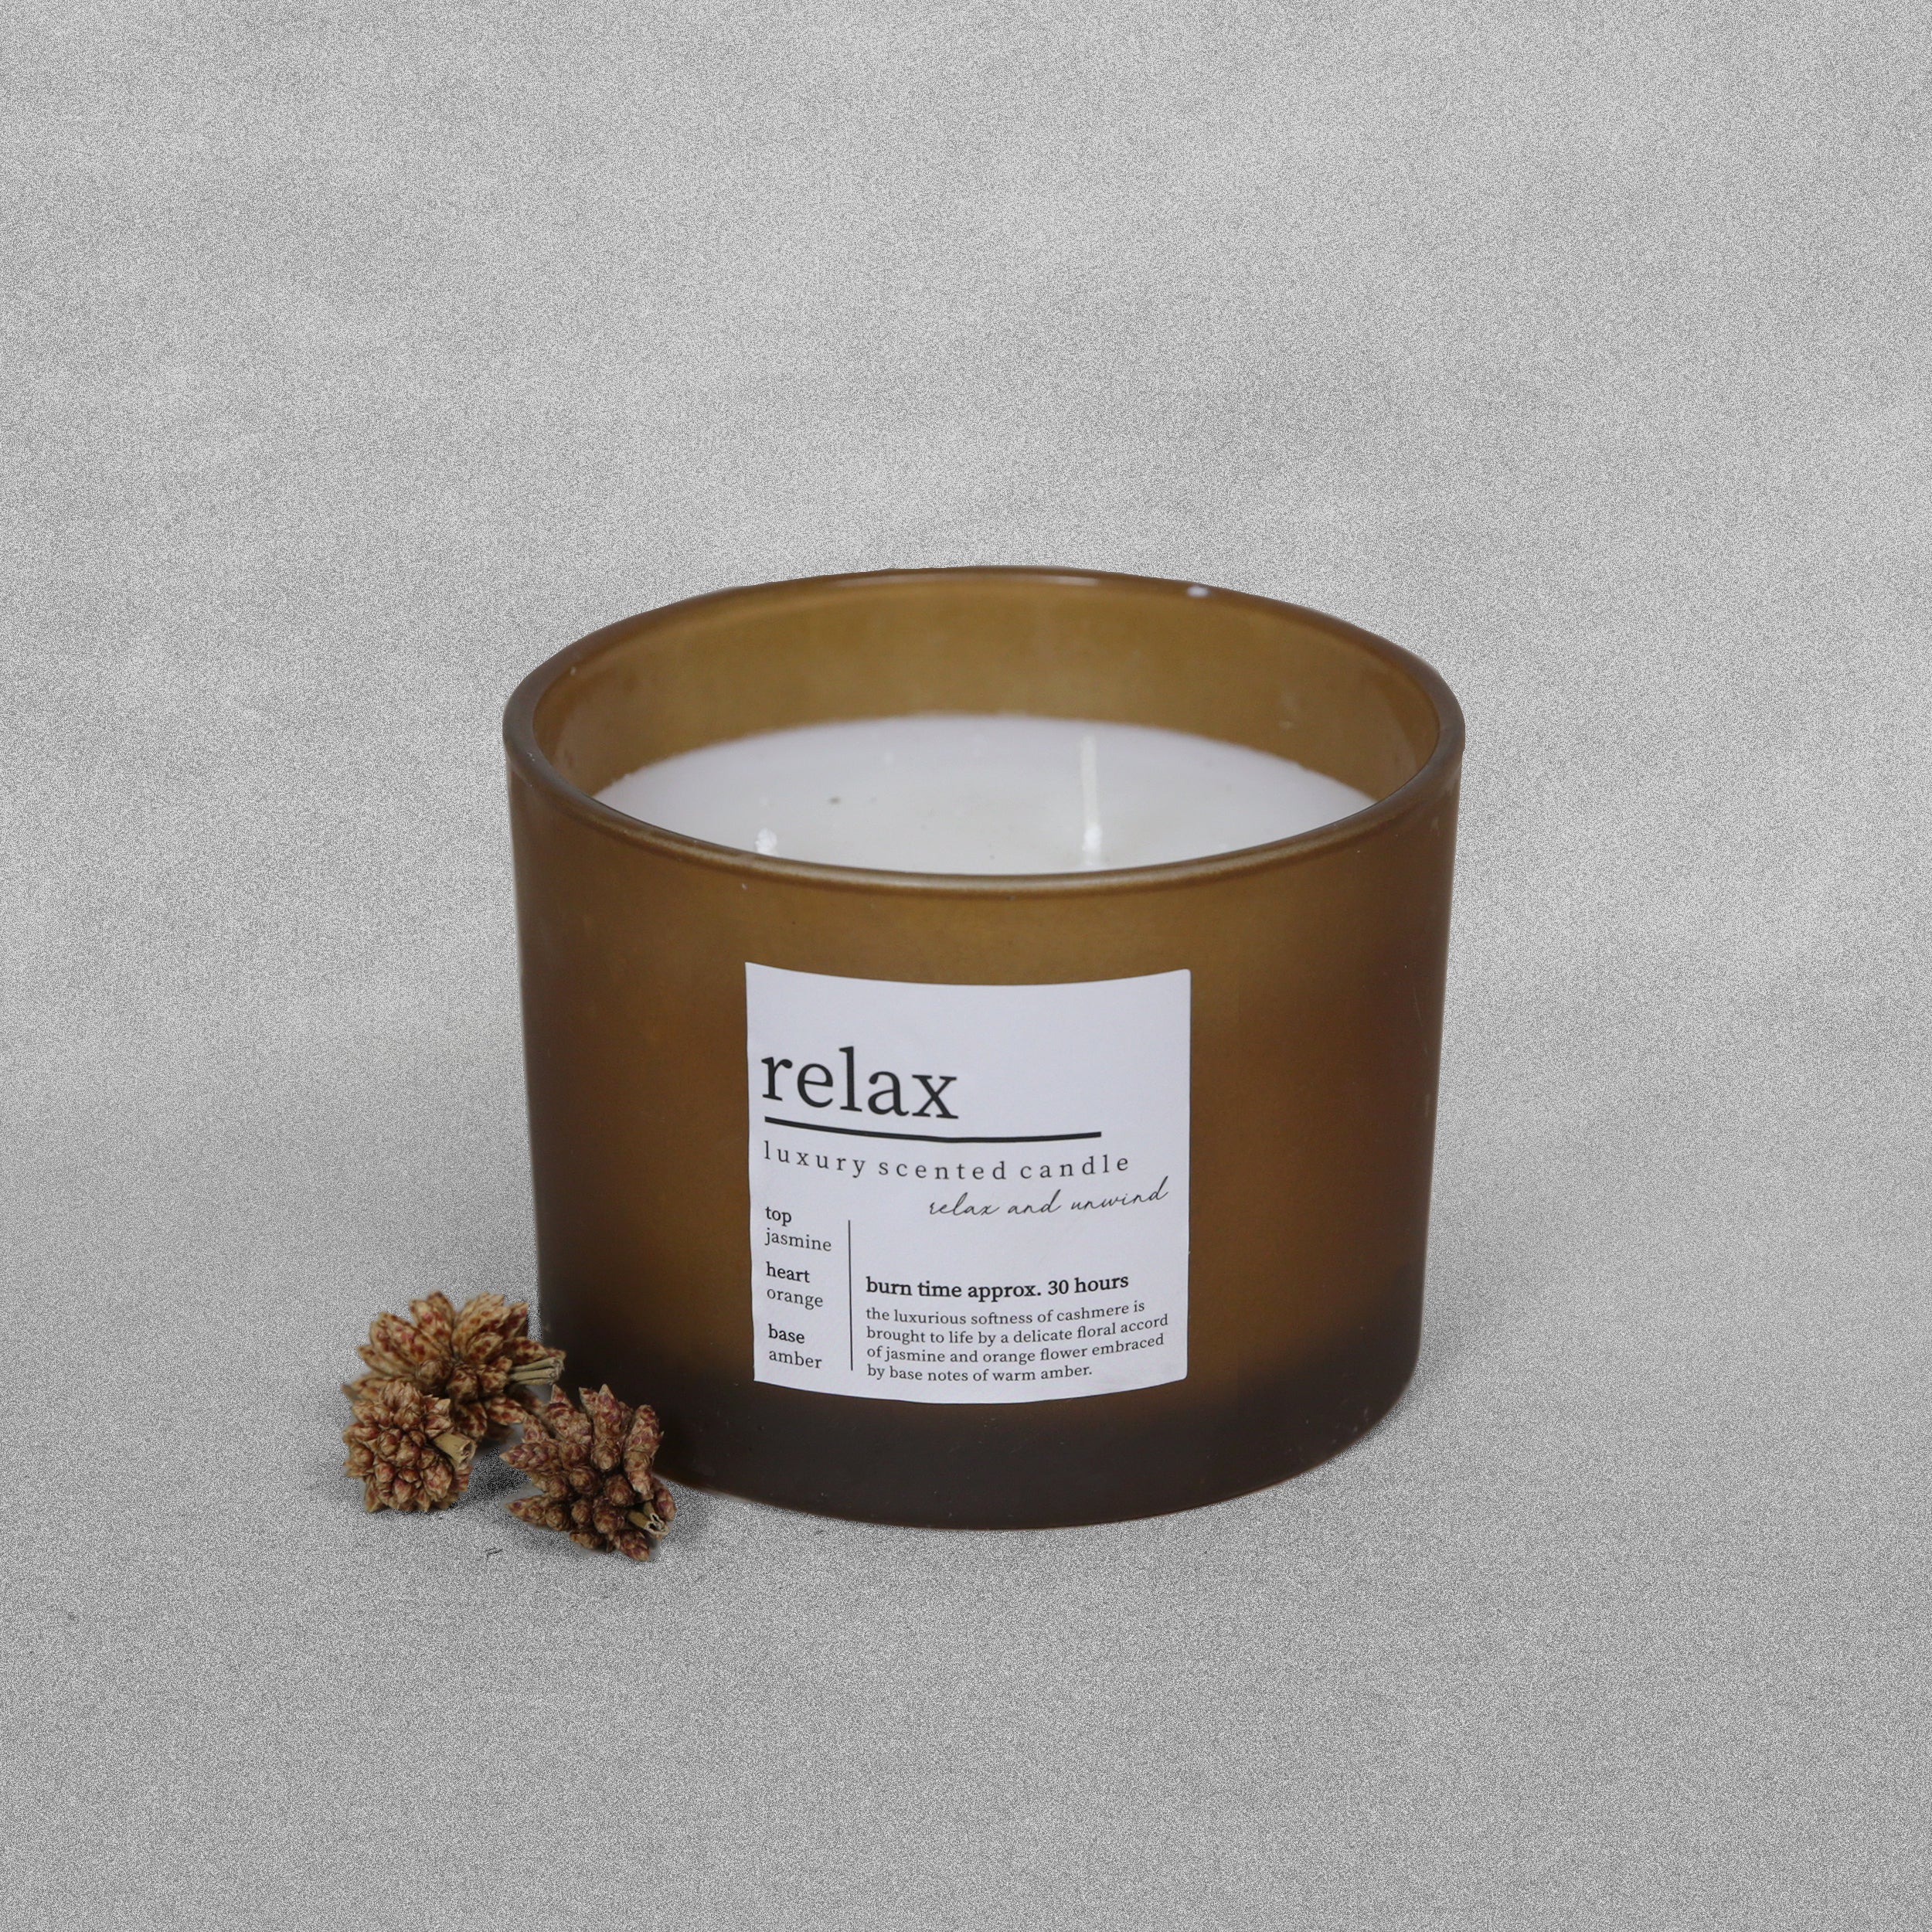 Relax Luxury Scented Glass Candle 335g